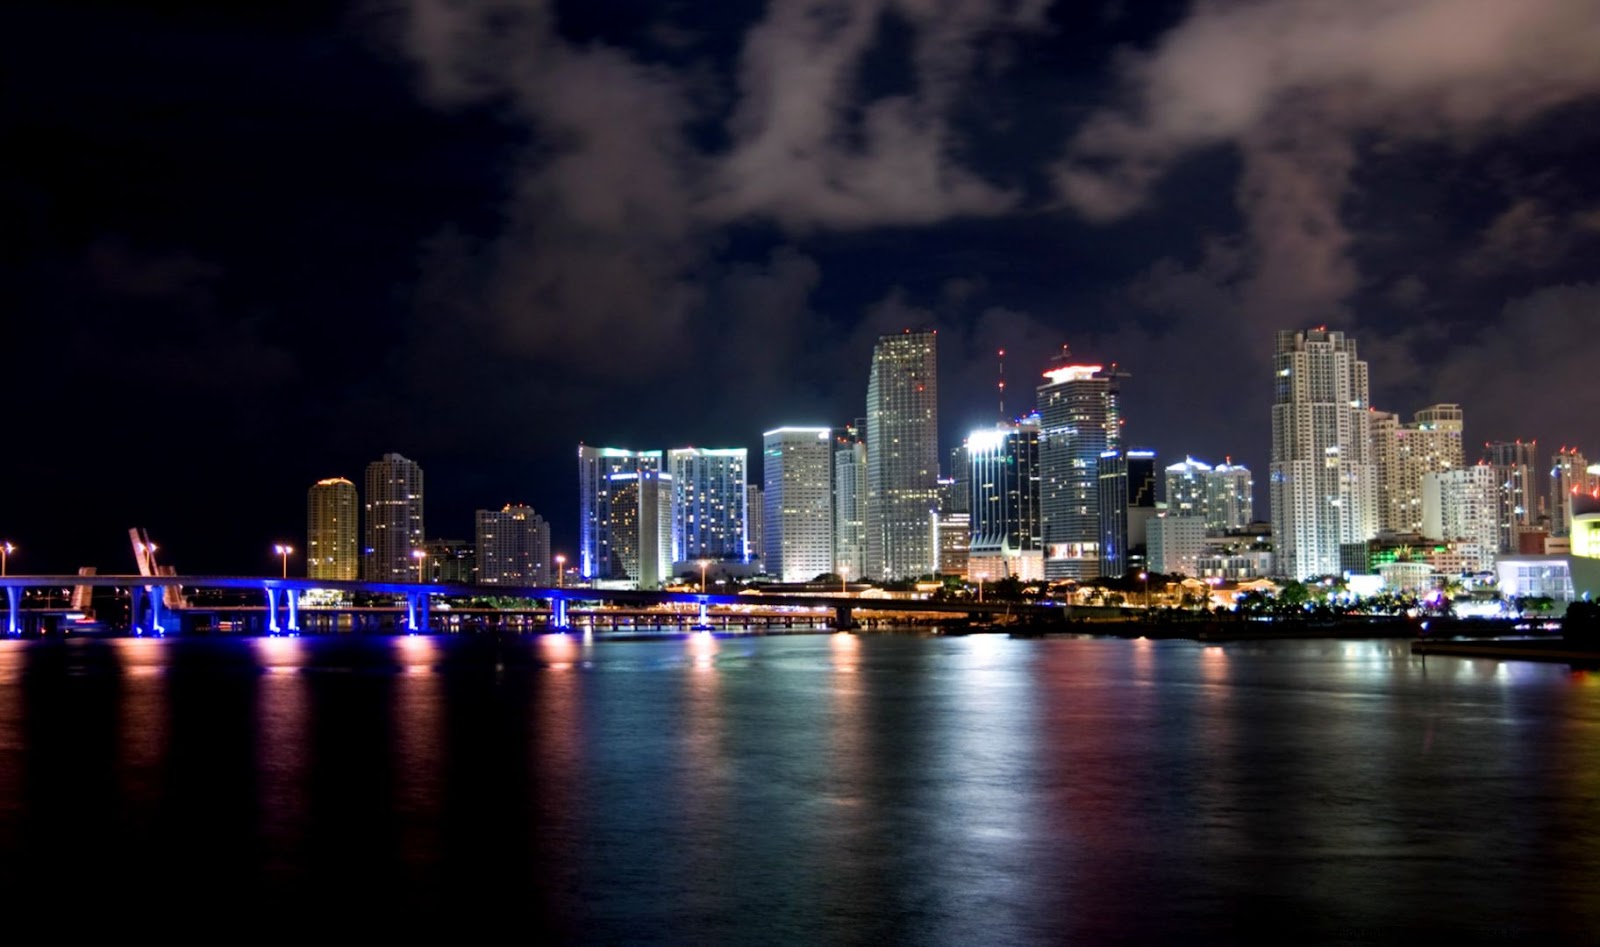 Skyline Miami City At Night Hd Wallpaper | High Definitions Wallpapers